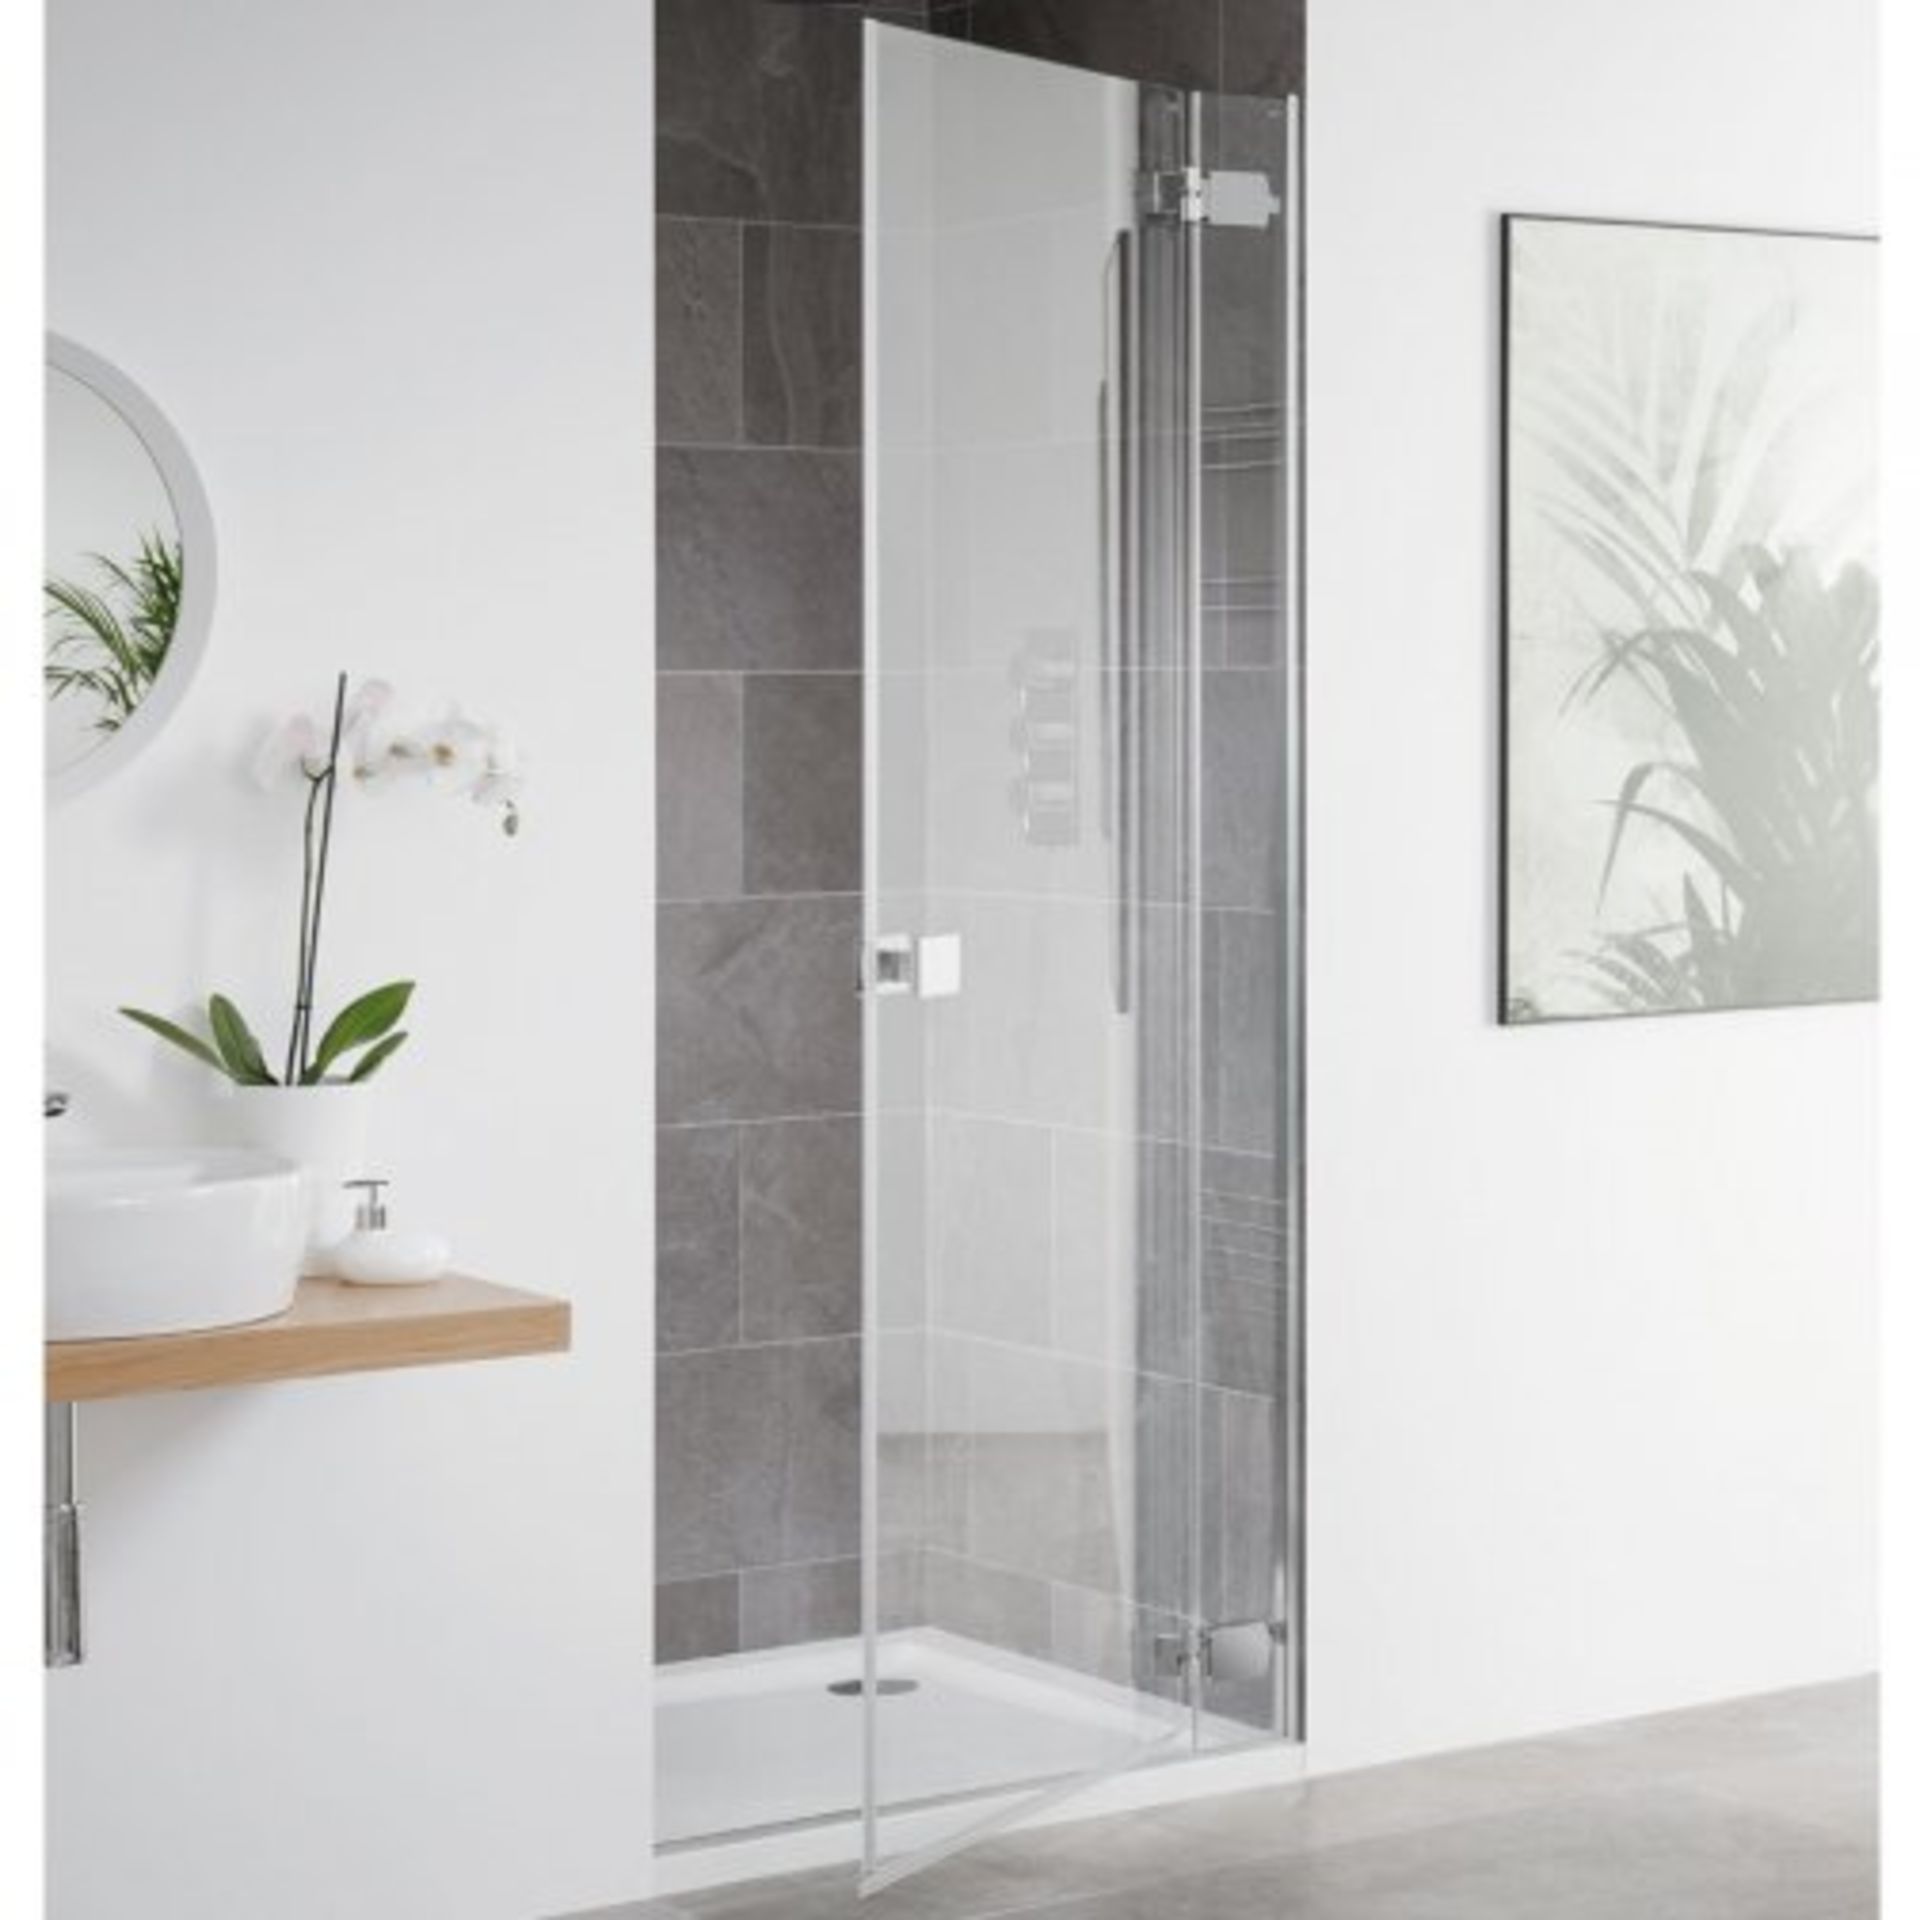 ZZ-LAK-LK801-080S - Lakes Barbados Hinged Shower Door with Panel - 2000mm x 800mm - 8mm Glass....